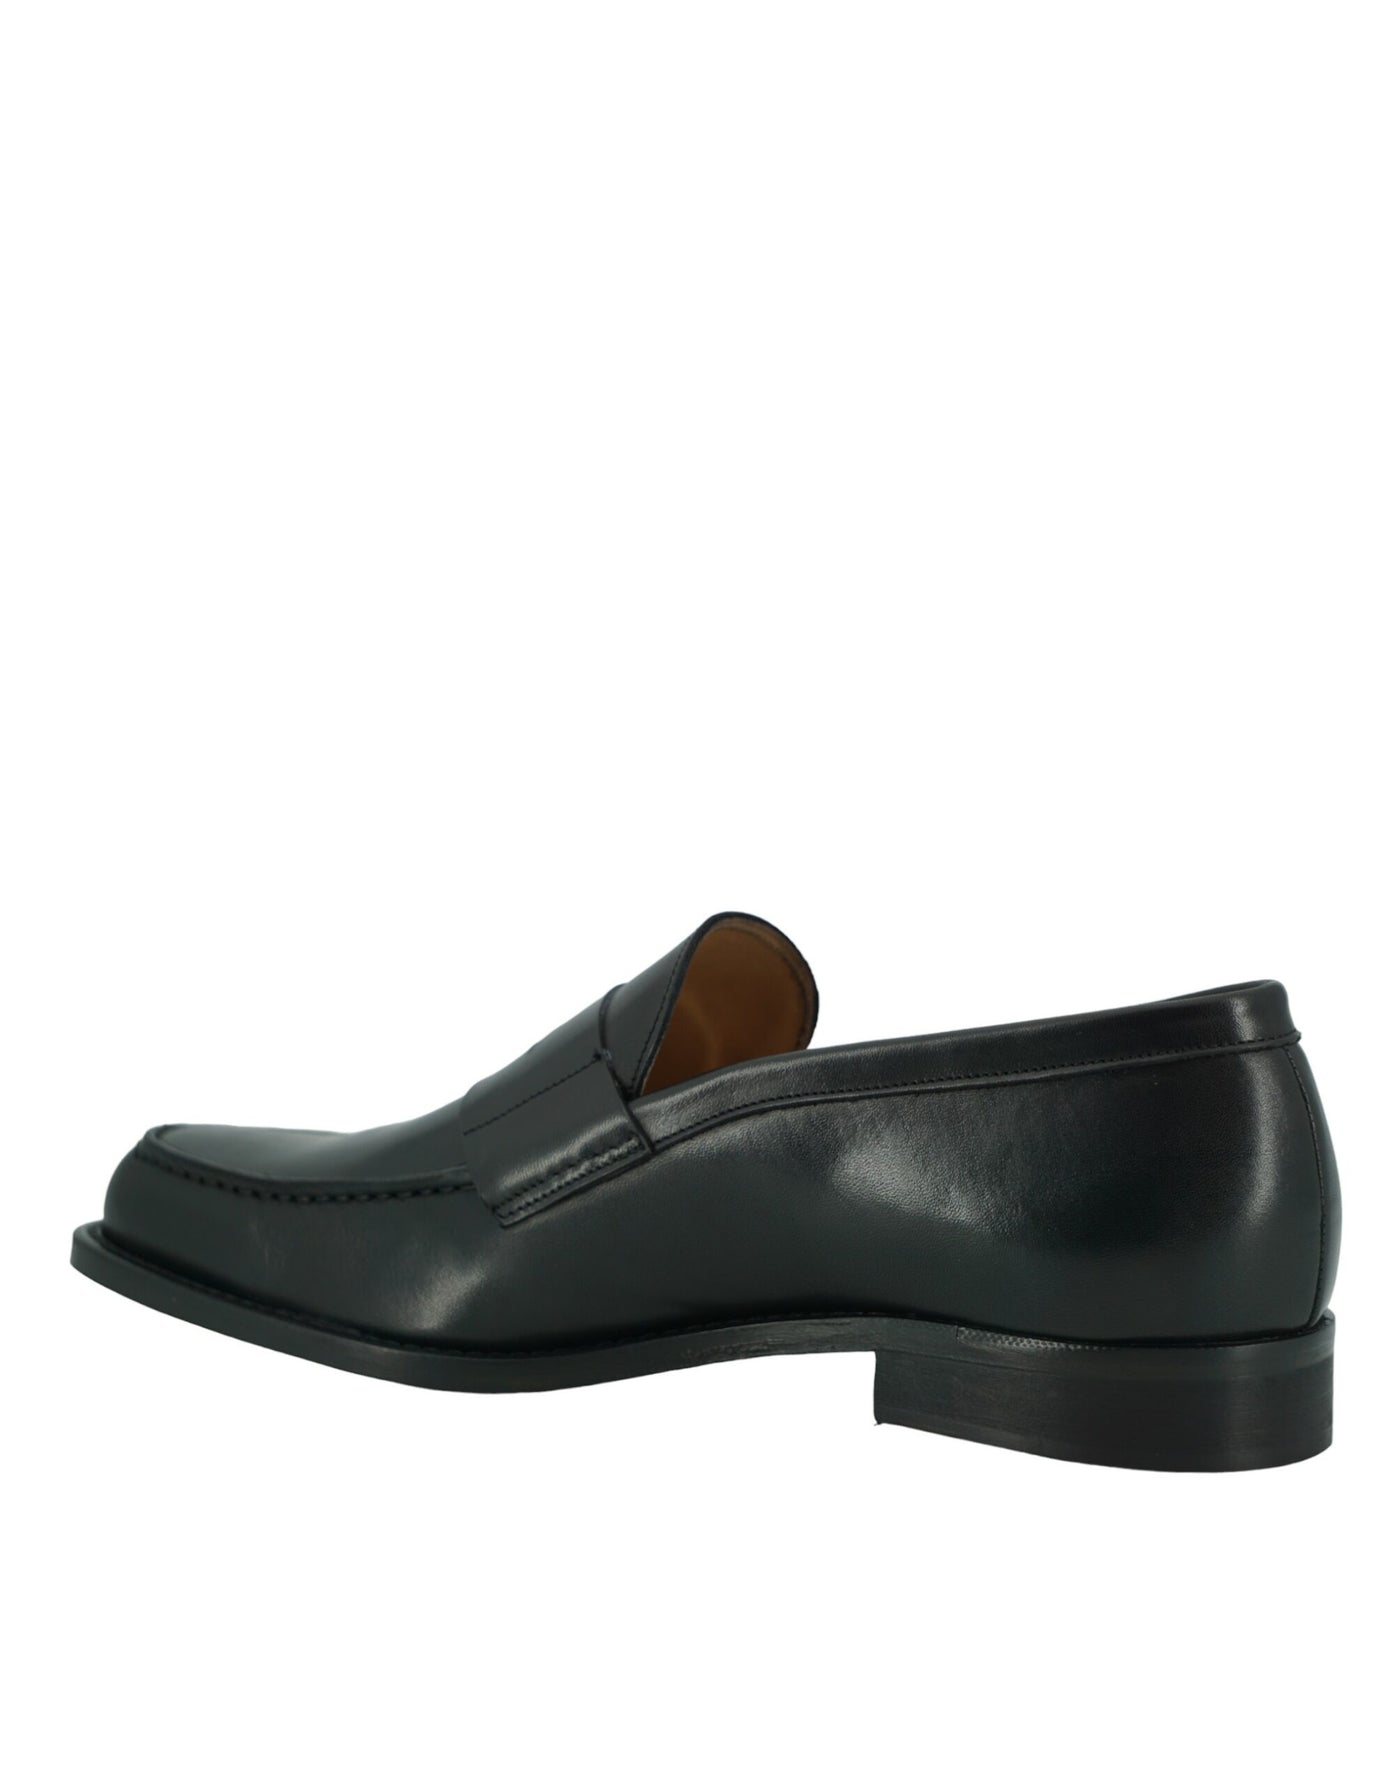 Saxone Of Scotland Black Calf Leather Mens Loafers Shoes